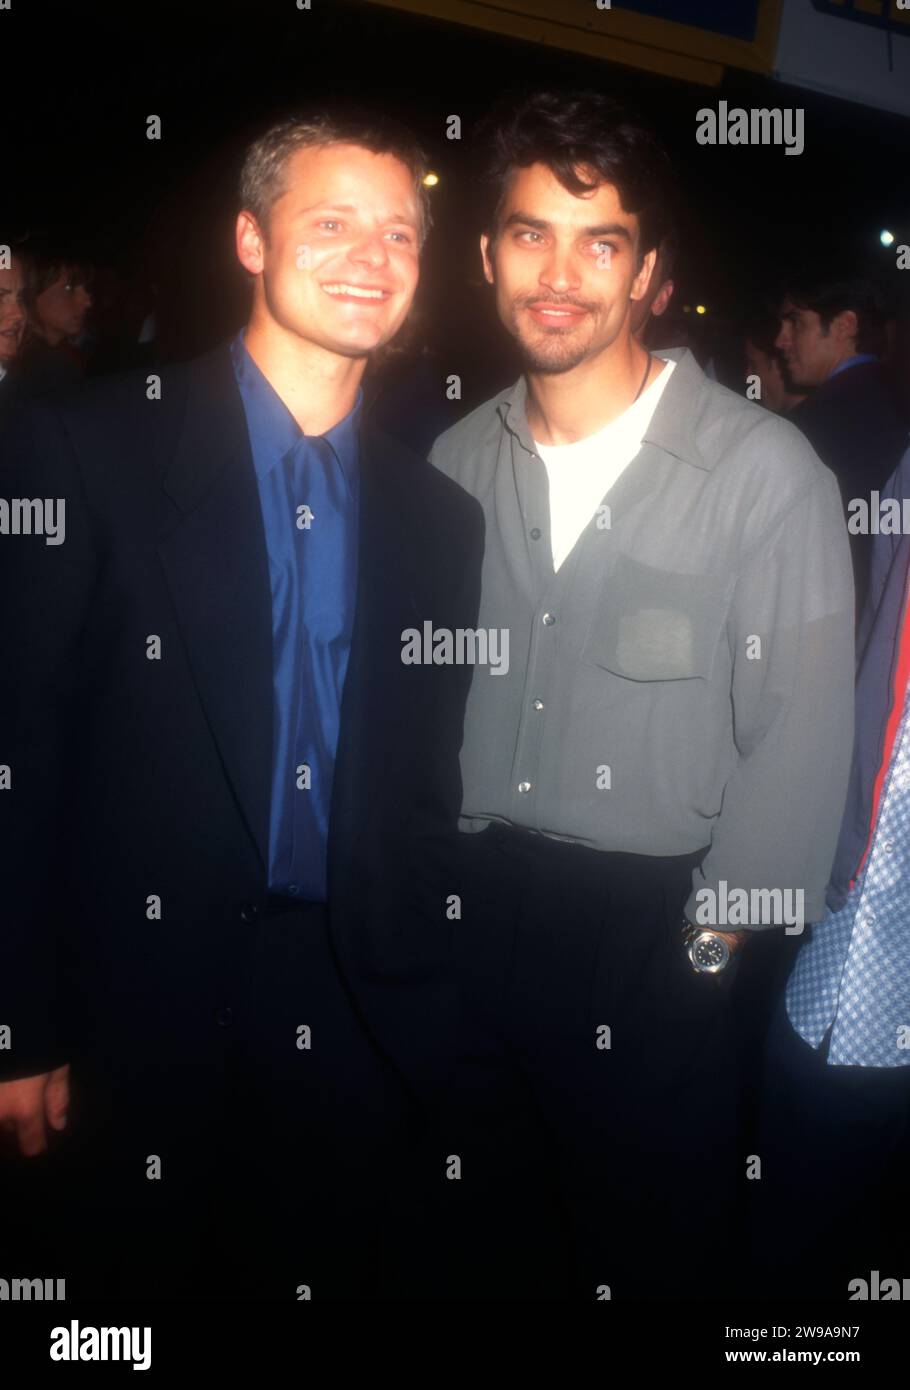 Century City, California, USA 30th September 1996 Actor Steve Zahn and Actor Johnathon Schaech attend 20th Century StudioÕs ÔThat Thing You DoÕ Premiere at Century City Cineplex Odeon Theaters on September 30, 1996 in Century City, California, USA. Photo by Barry King/Alamy Stock Photo Stock Photo